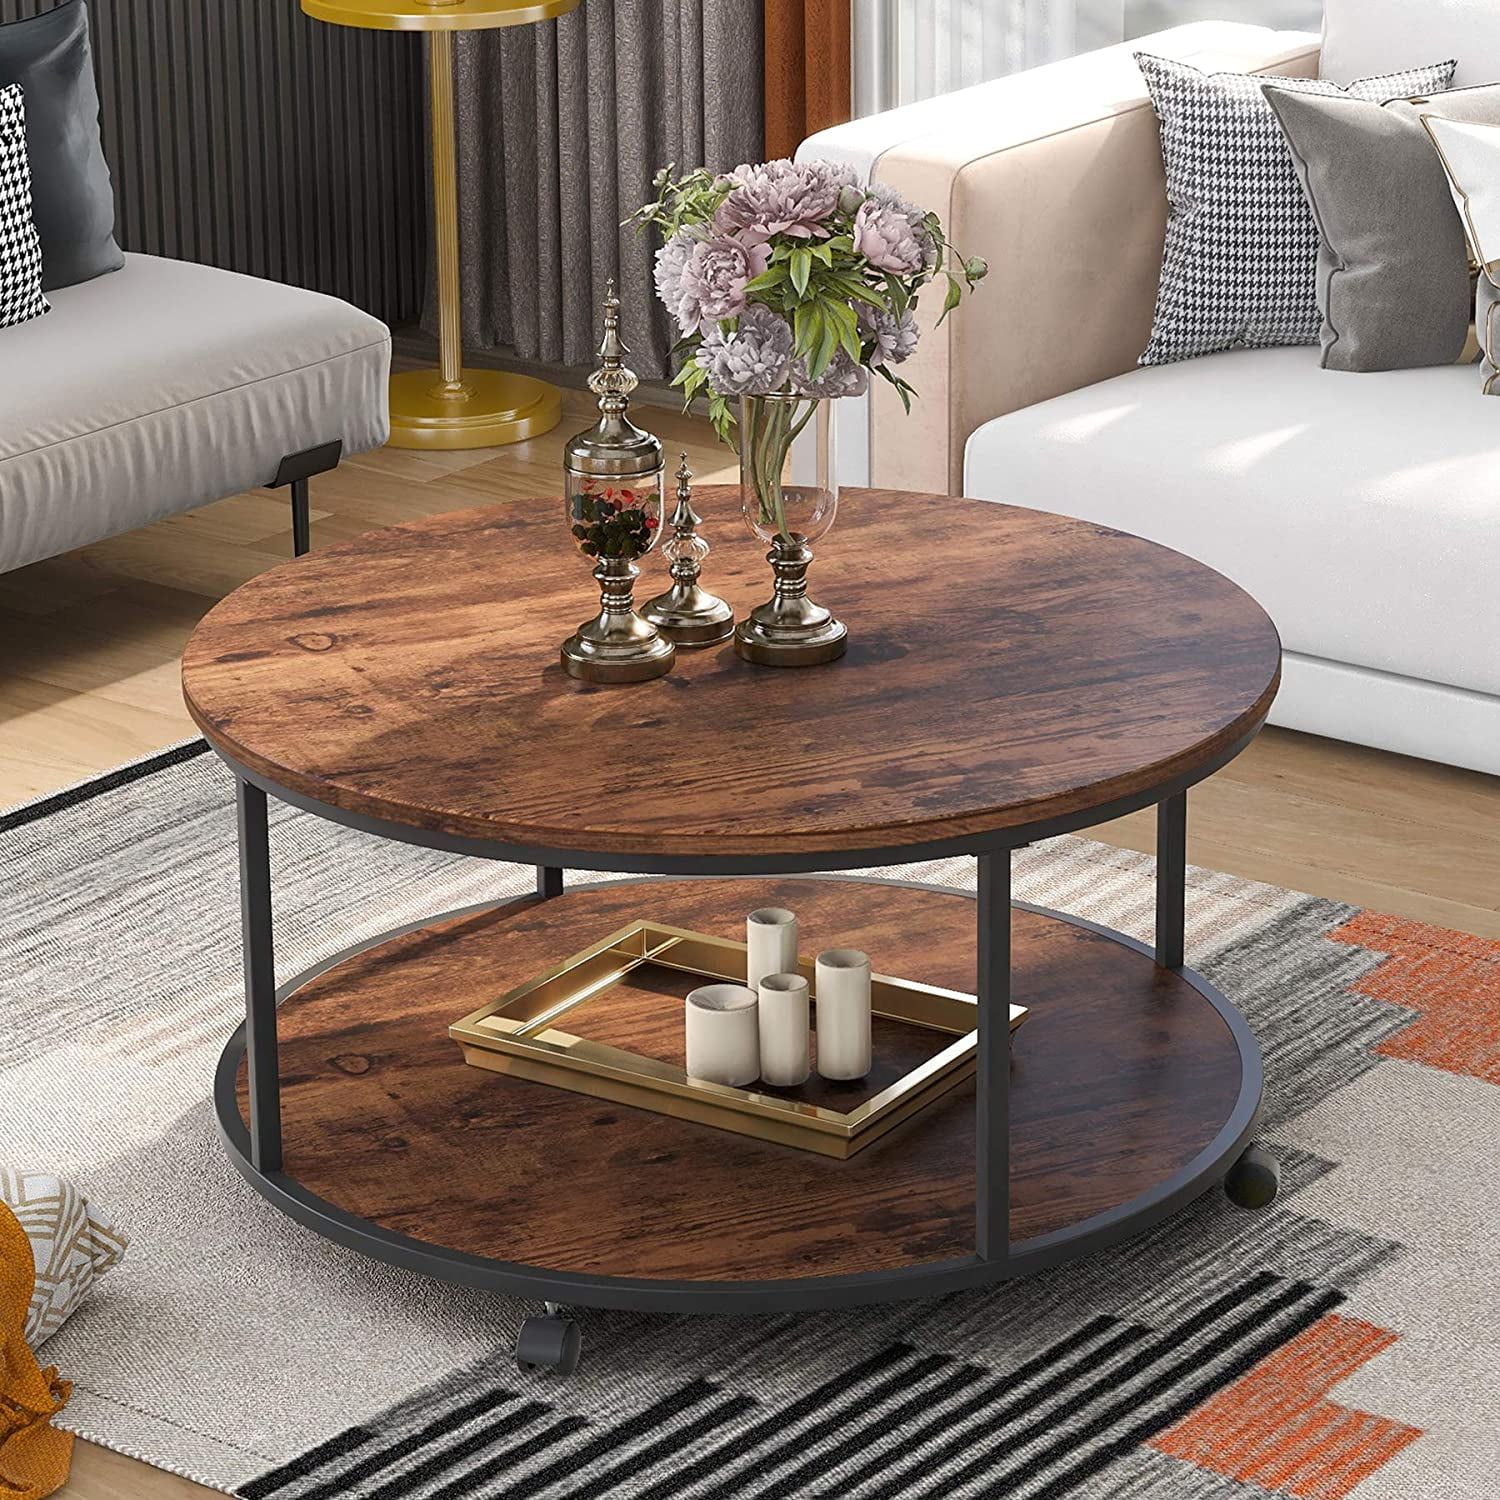 Wooden Coffee Table Designs For Living Room – Round Coffee Table Inside Brown Rustic Coffee Tables (View 13 of 20)